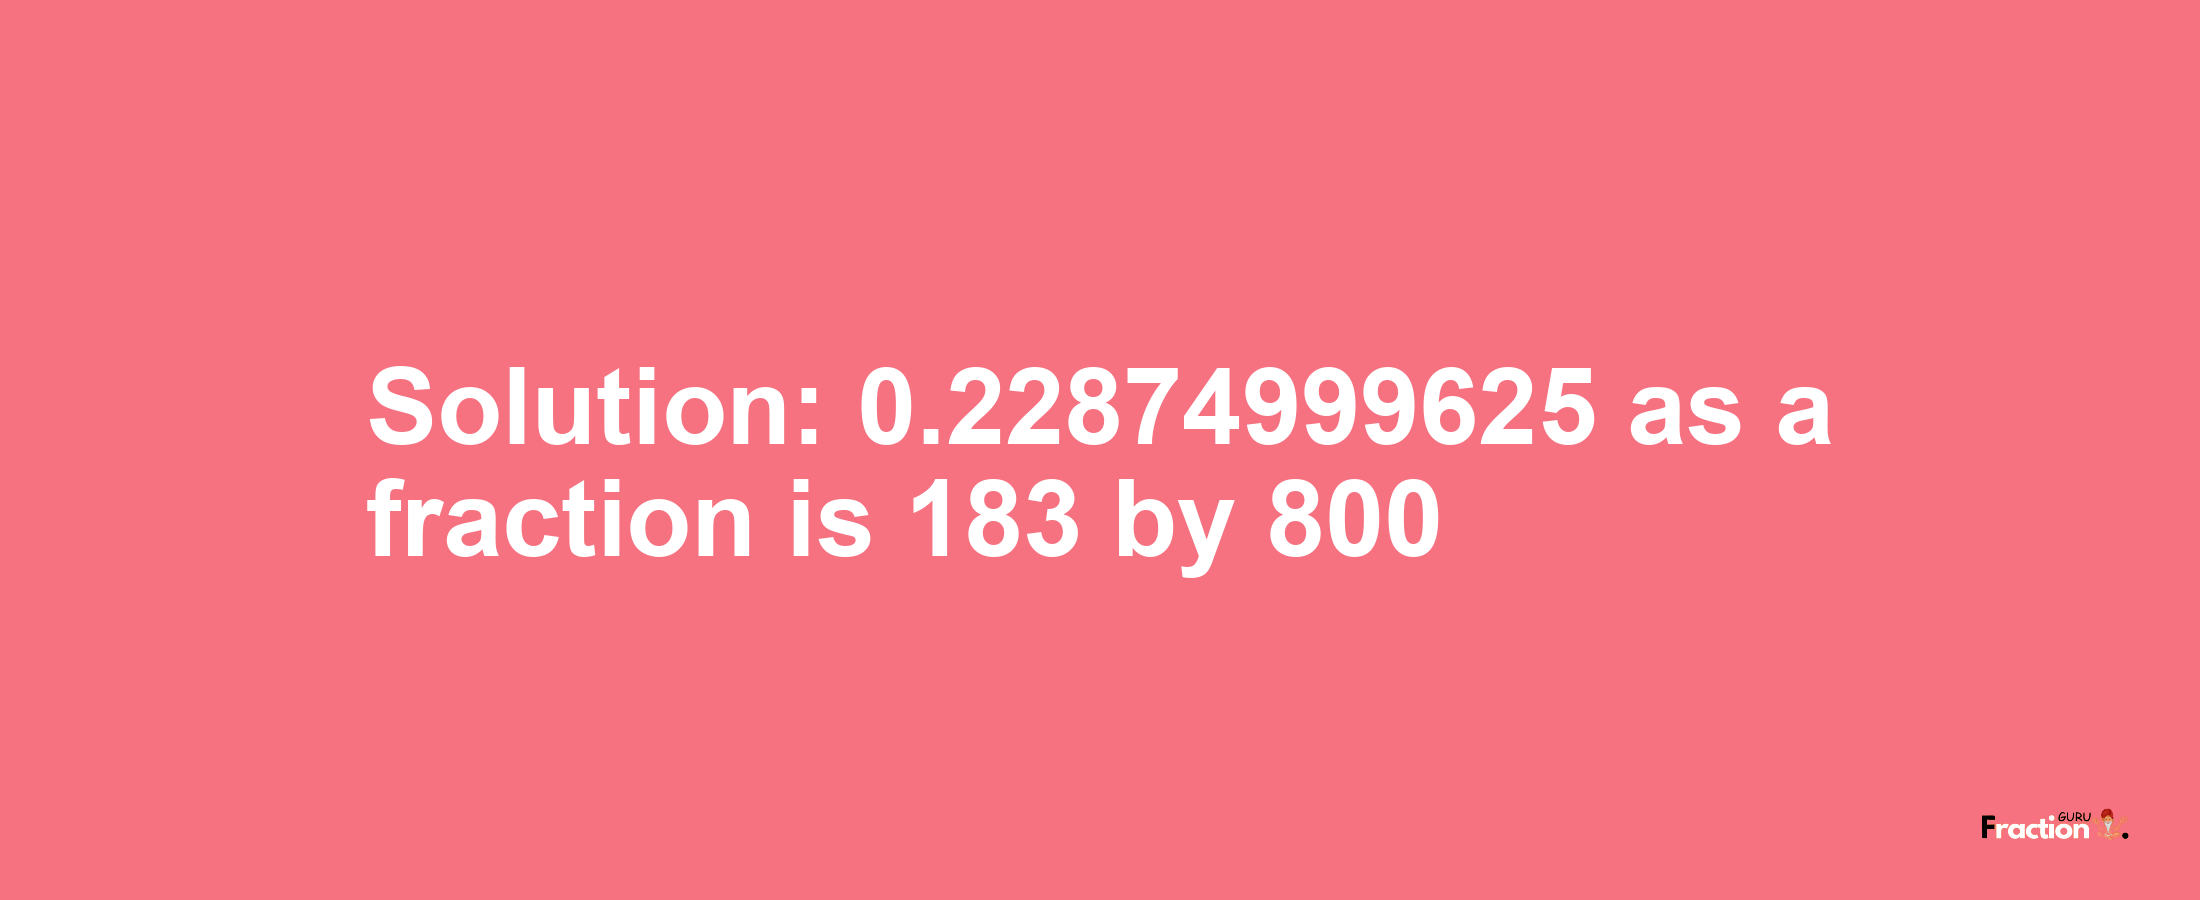 Solution:0.22874999625 as a fraction is 183/800